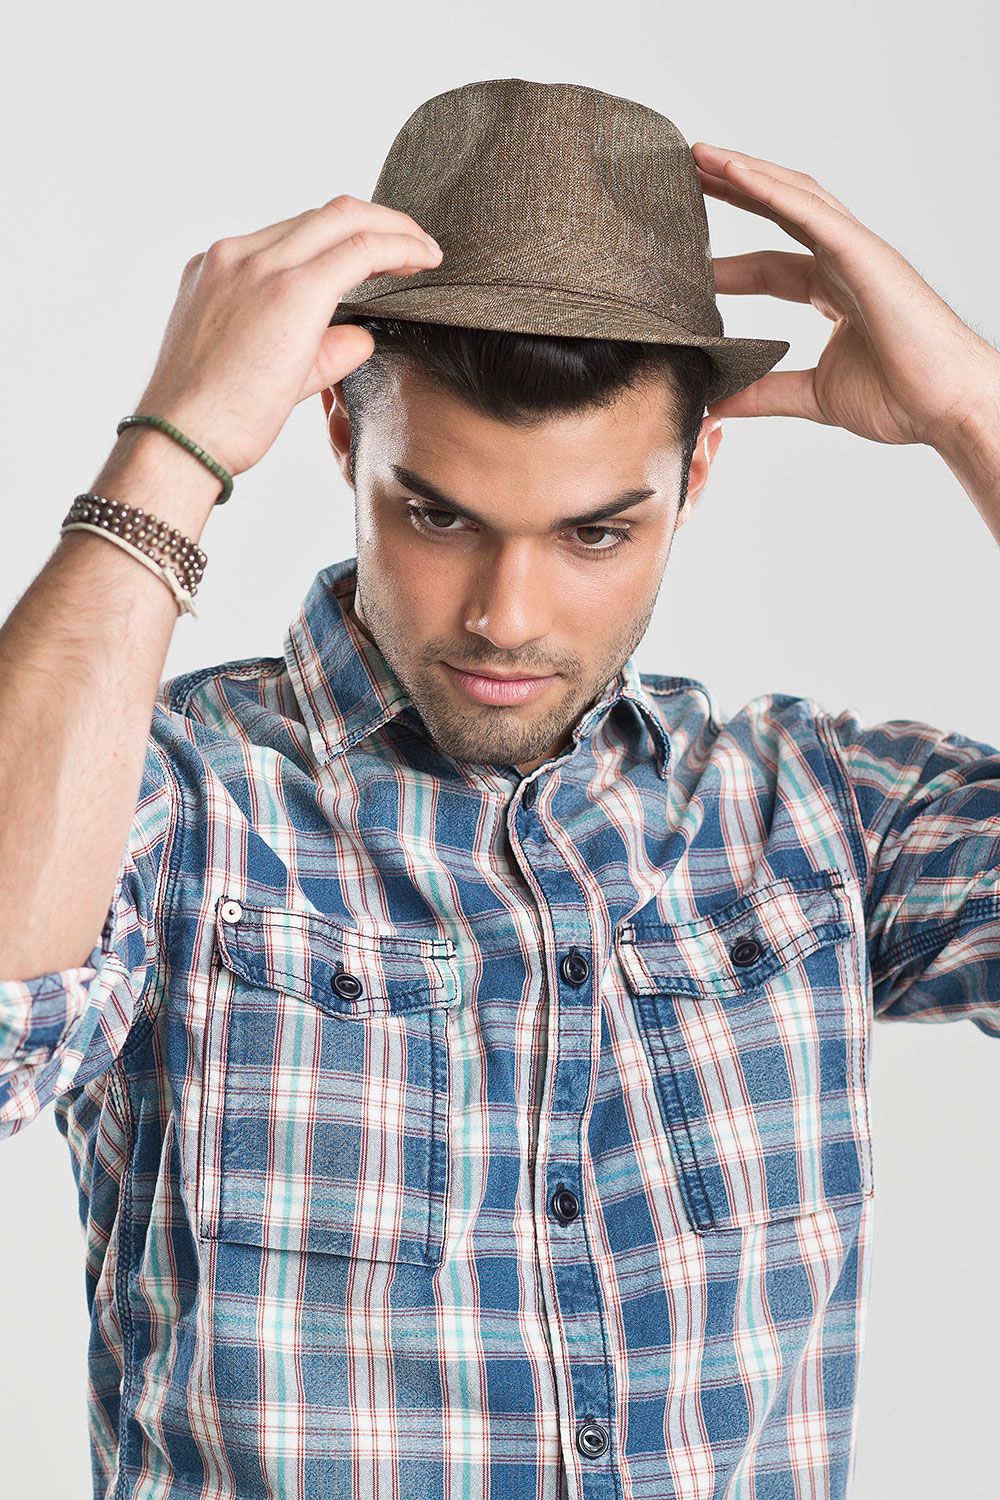 10 Things Men Wear That Should Be Major Red Flags